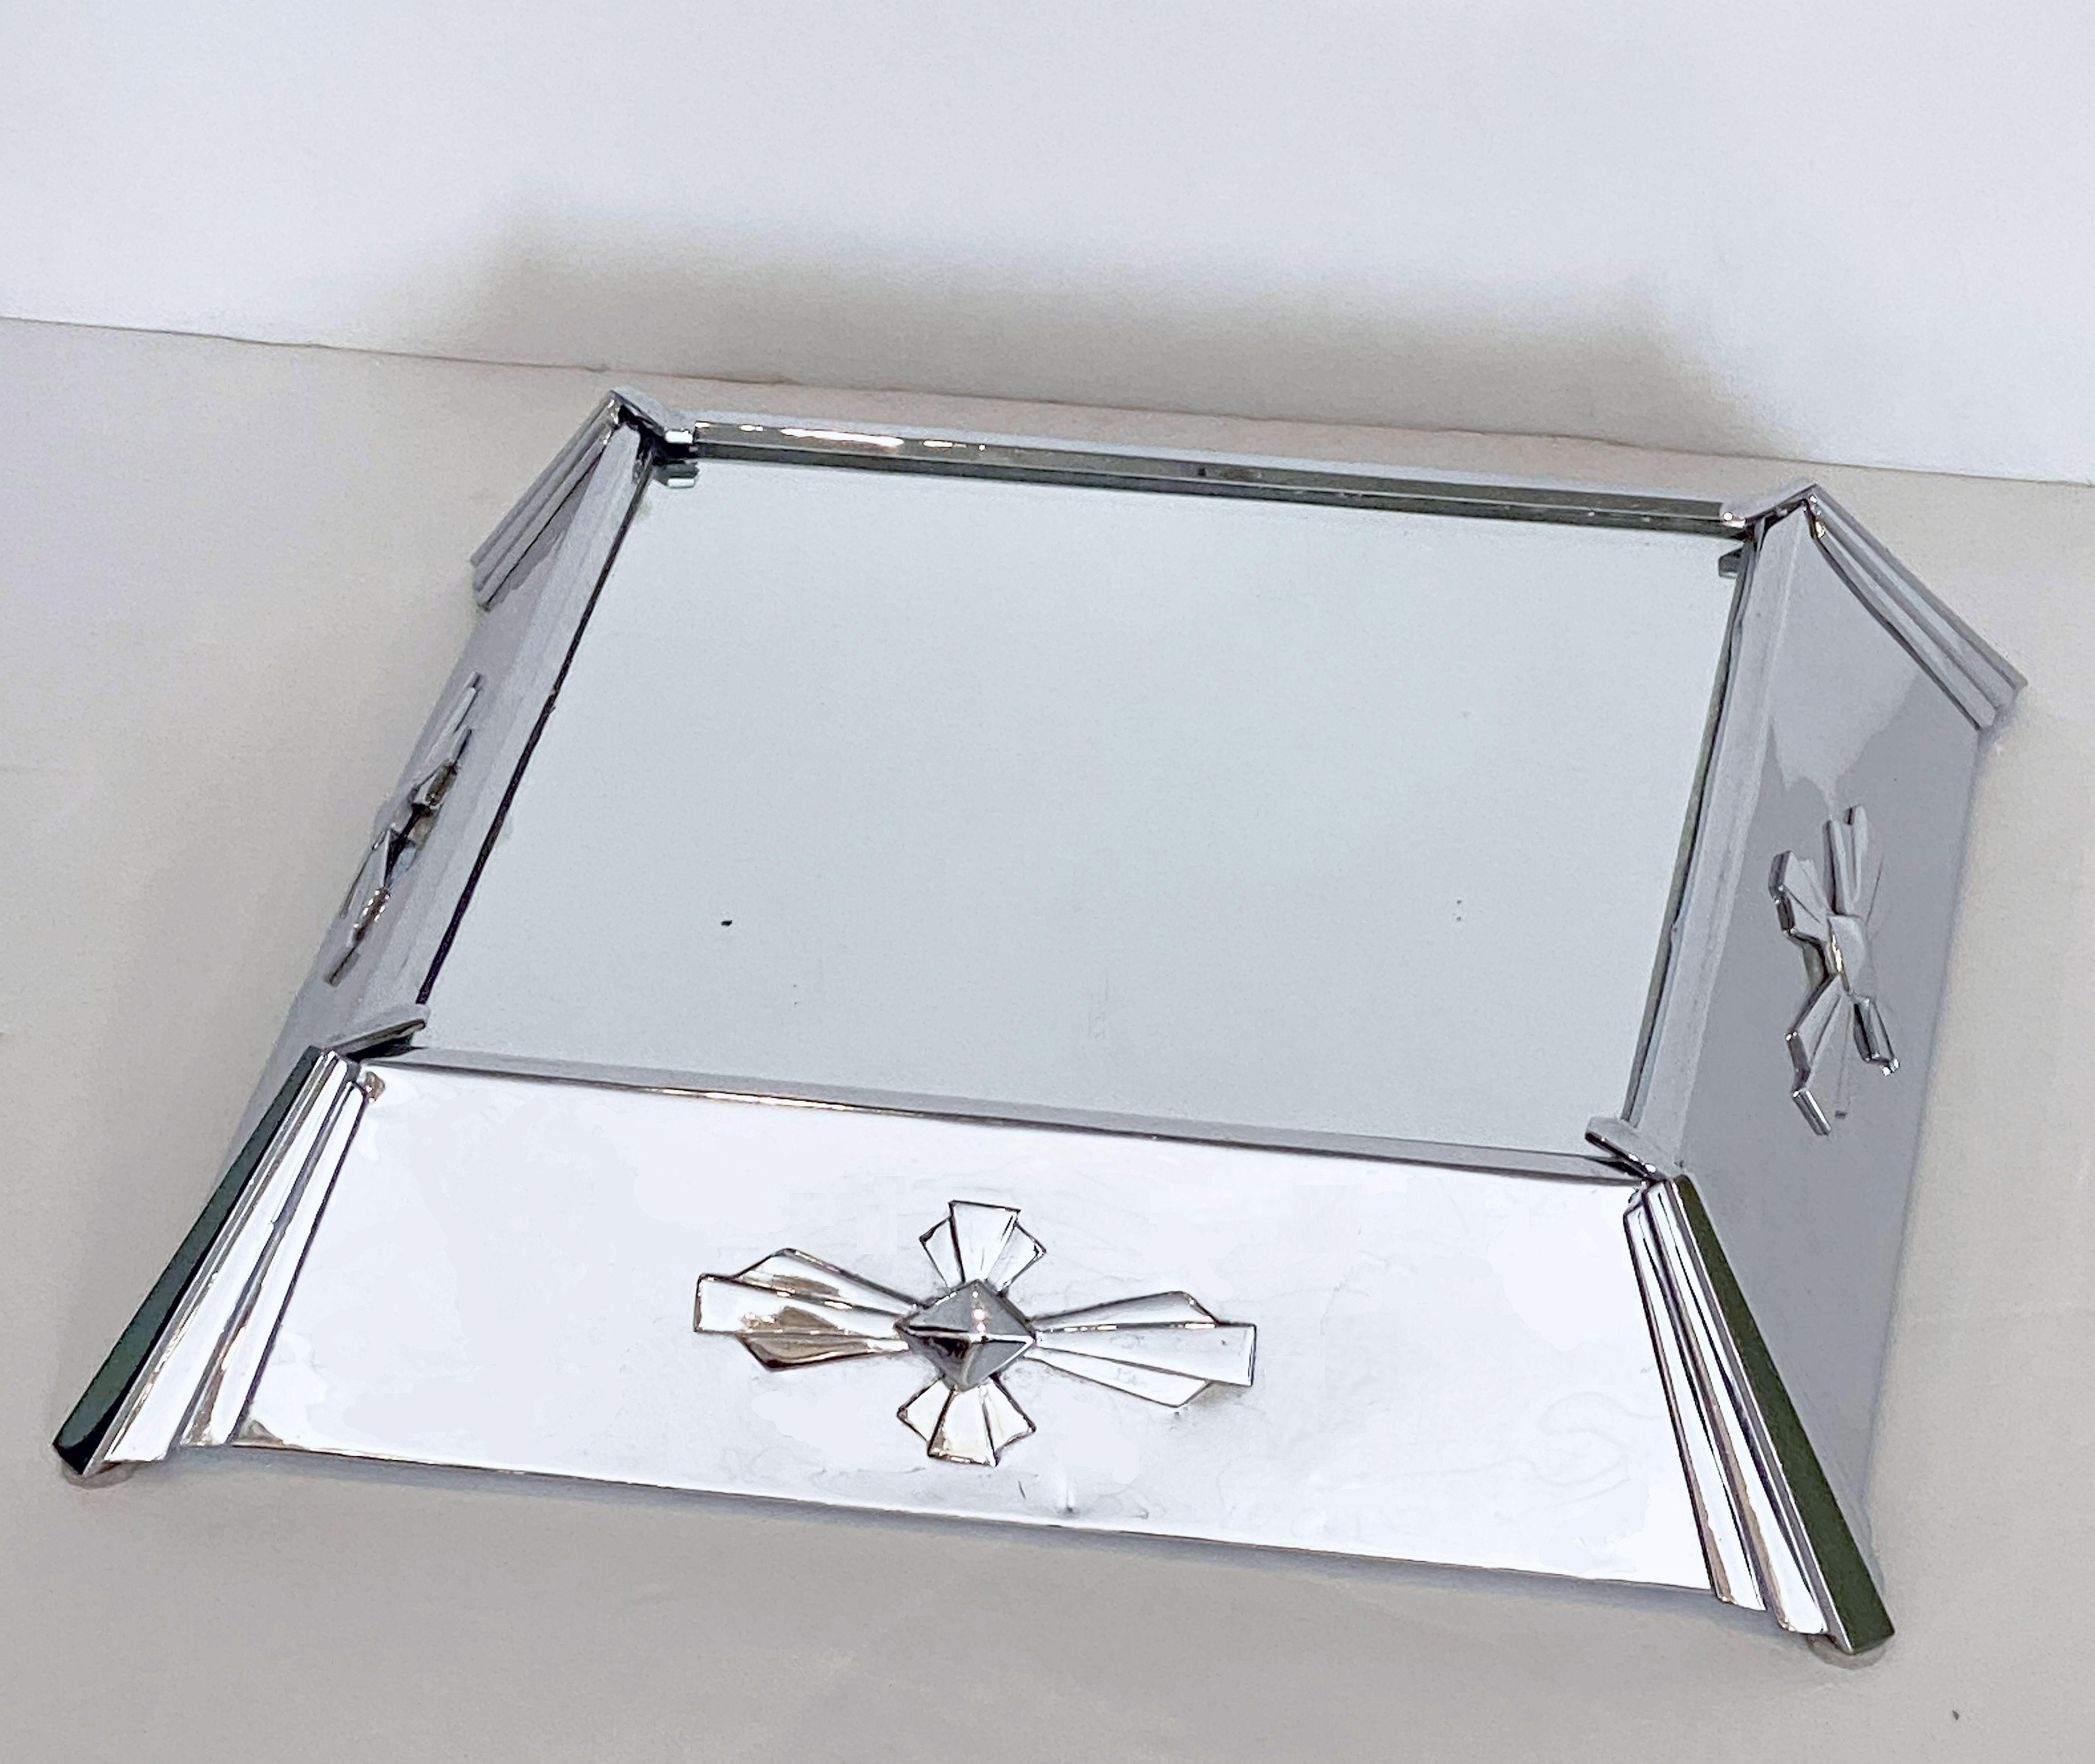 A fine period Art Deco plateau mirror or mirrored cake stand from England, featuring a square mirrored glass top in an inset stand with chamfered or pyramidal edges and stylized Art Deco corners and cartouches.

Perfect for a barware display or